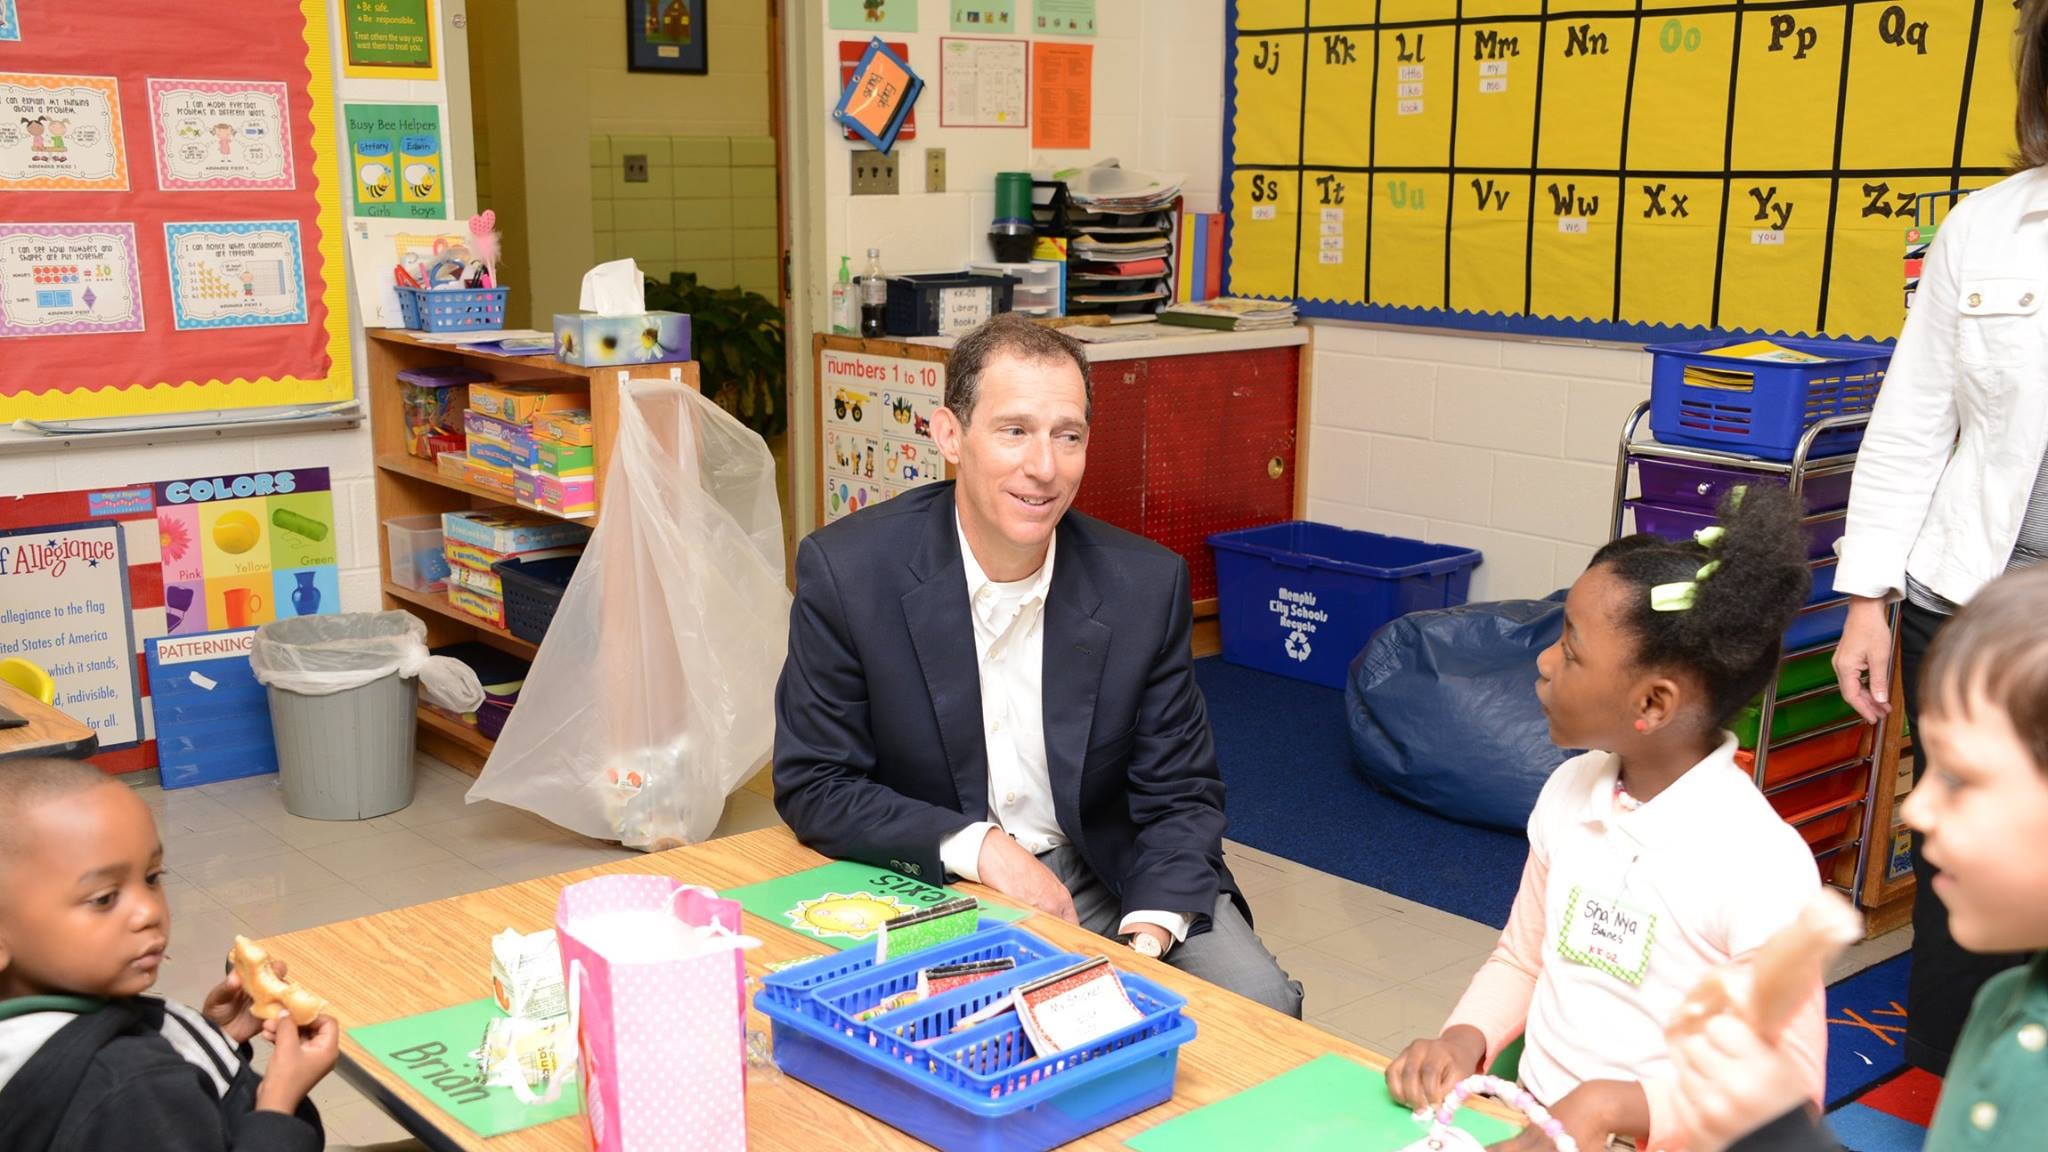 A male politician in a suit jacket sits at a small table in an elementary school classroom with two young students. A young girl looks at him inquisitively.